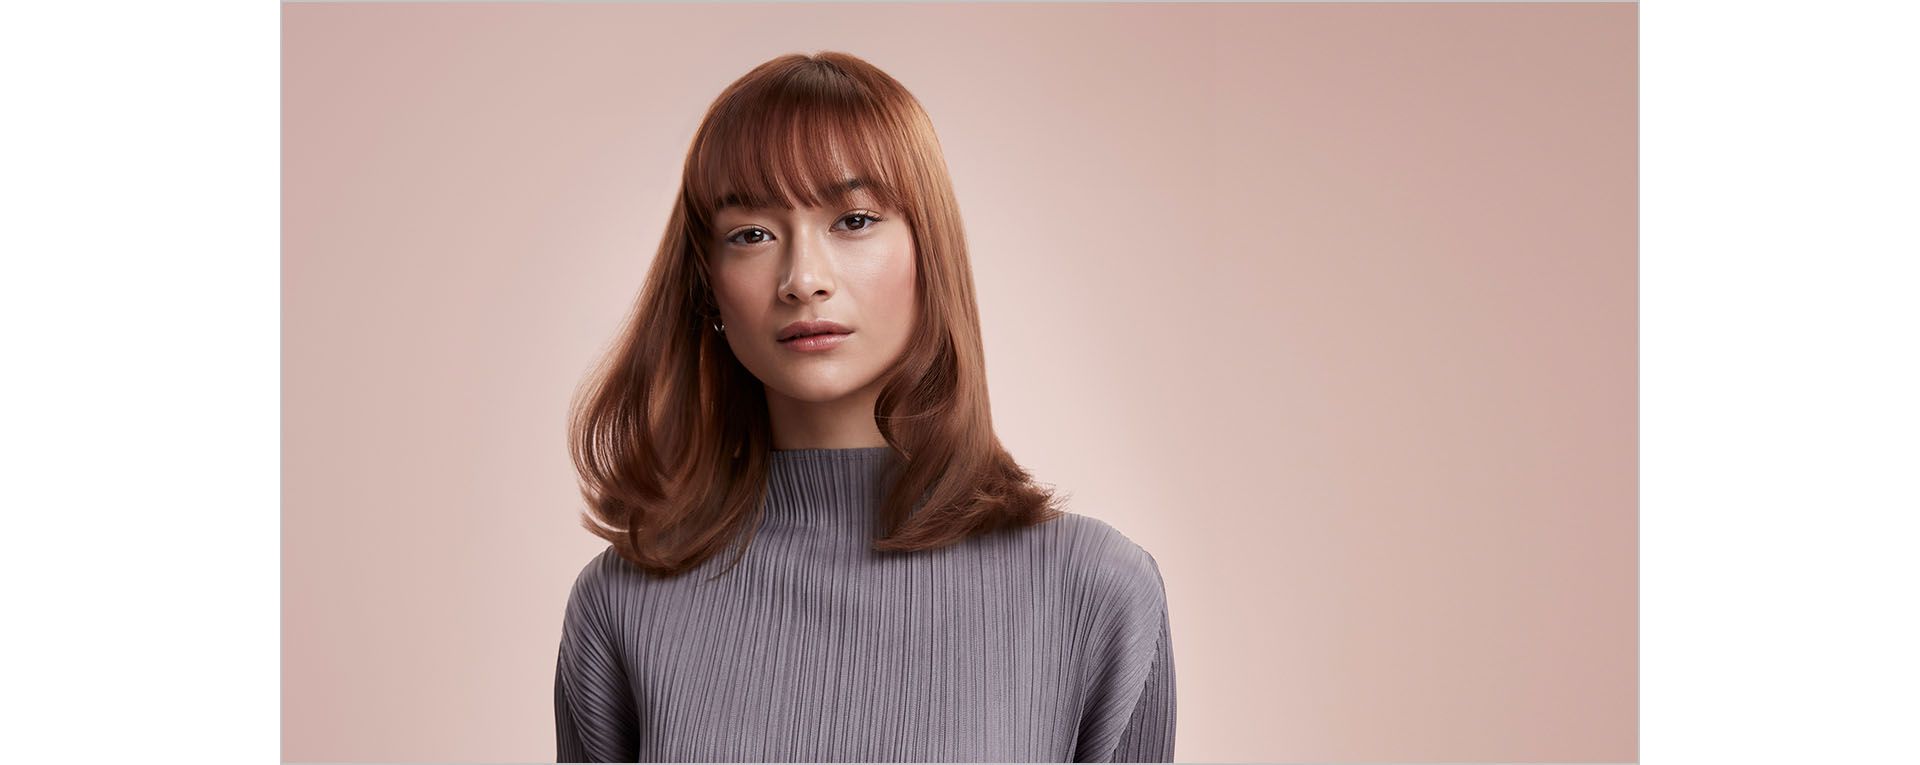 Model with blow-dried hair